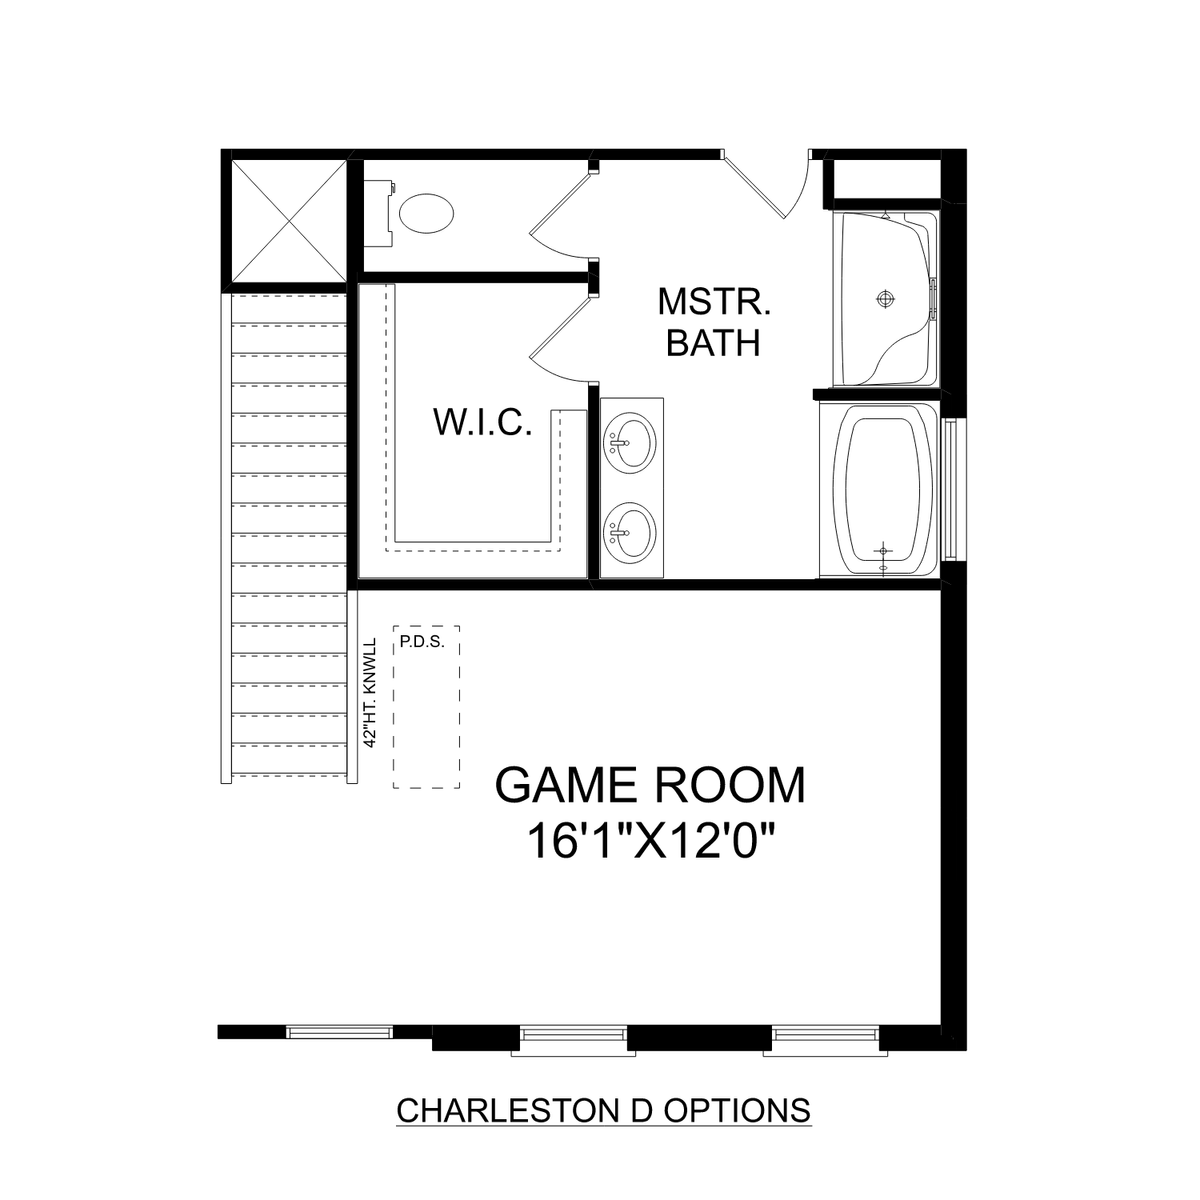 3 - The Charleston D floor plan layout for 24454 Beacon Circle in Davidson Homes' Old Stone community.